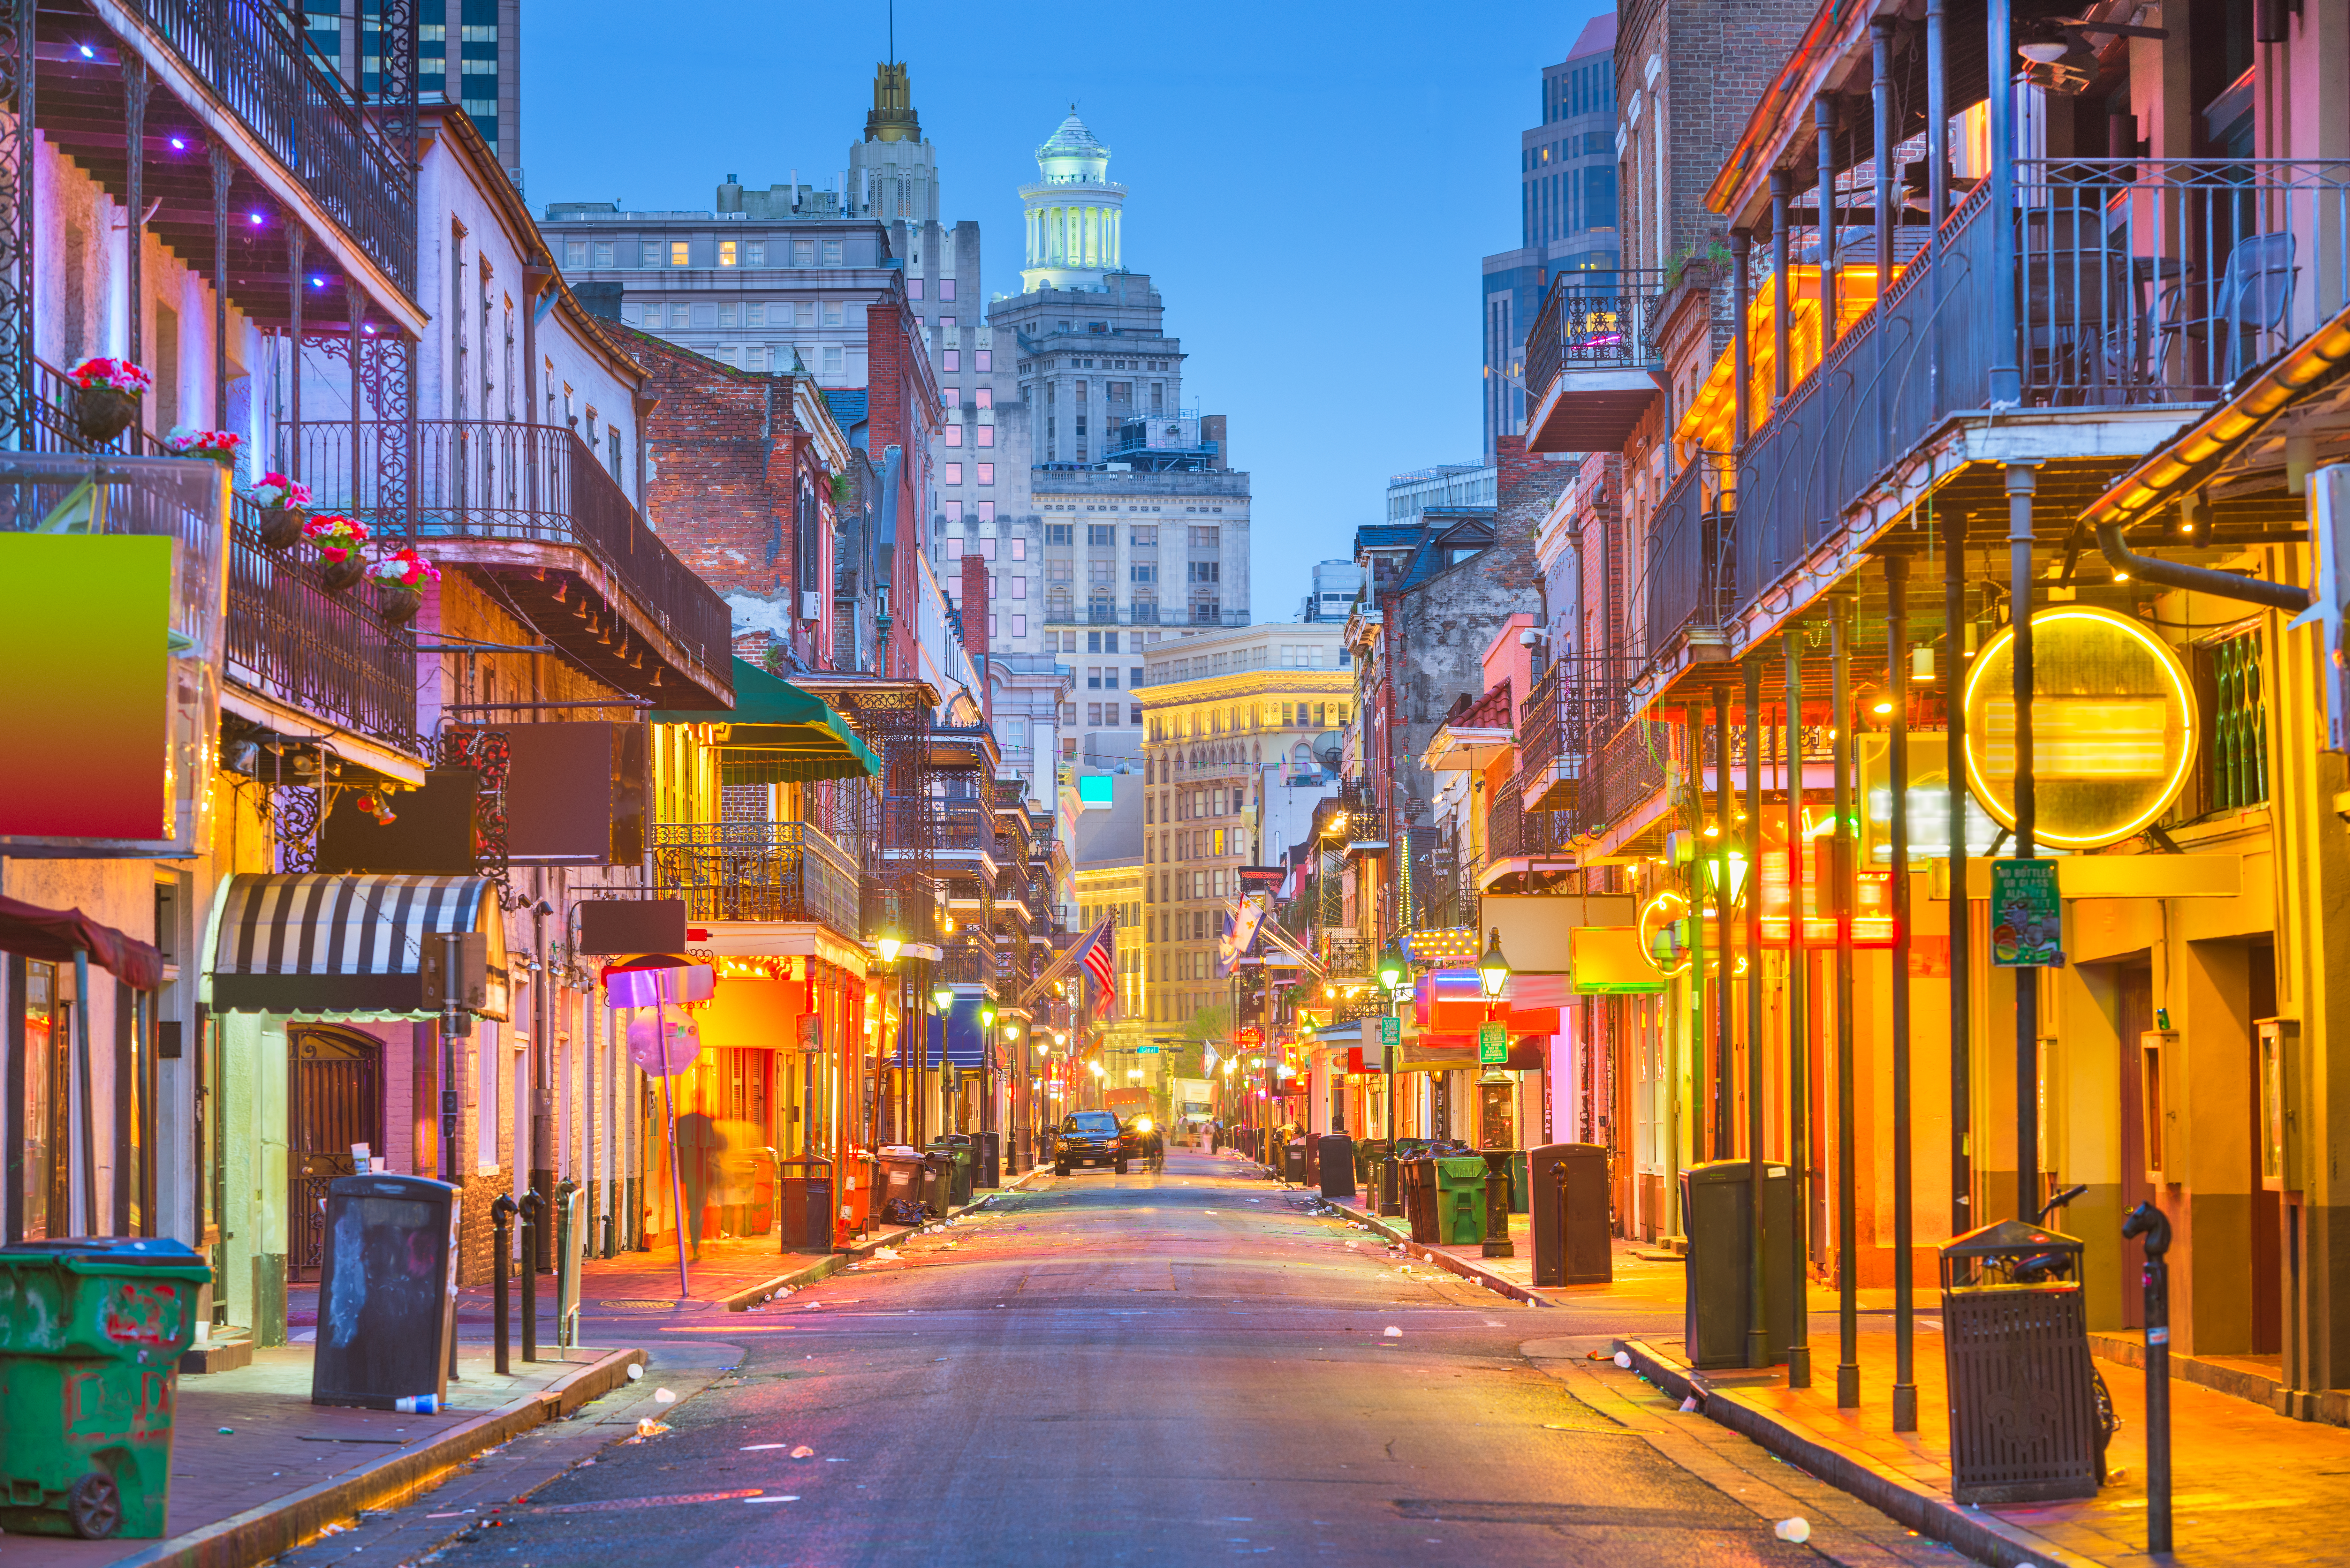 Best Things to Do in New Orleans - Bourbon Street In the French Quarter